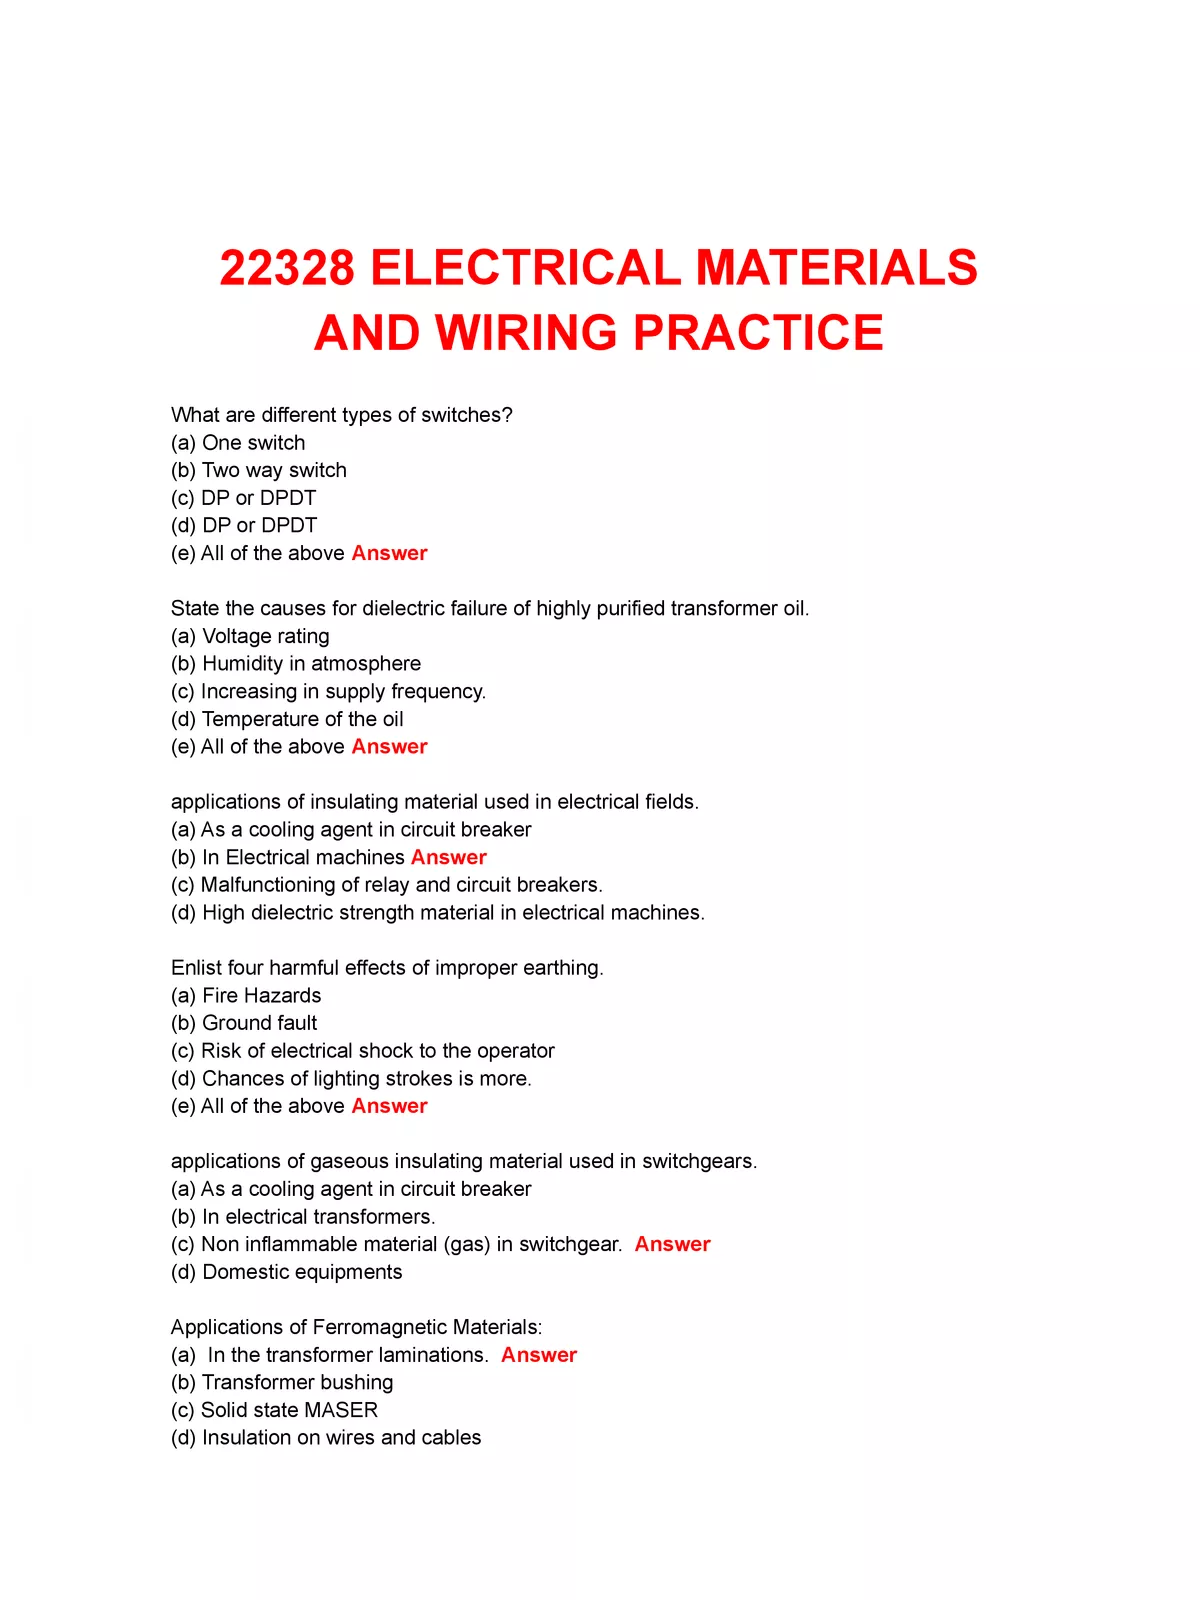 Electrical Material and Wiring Practice MCQ